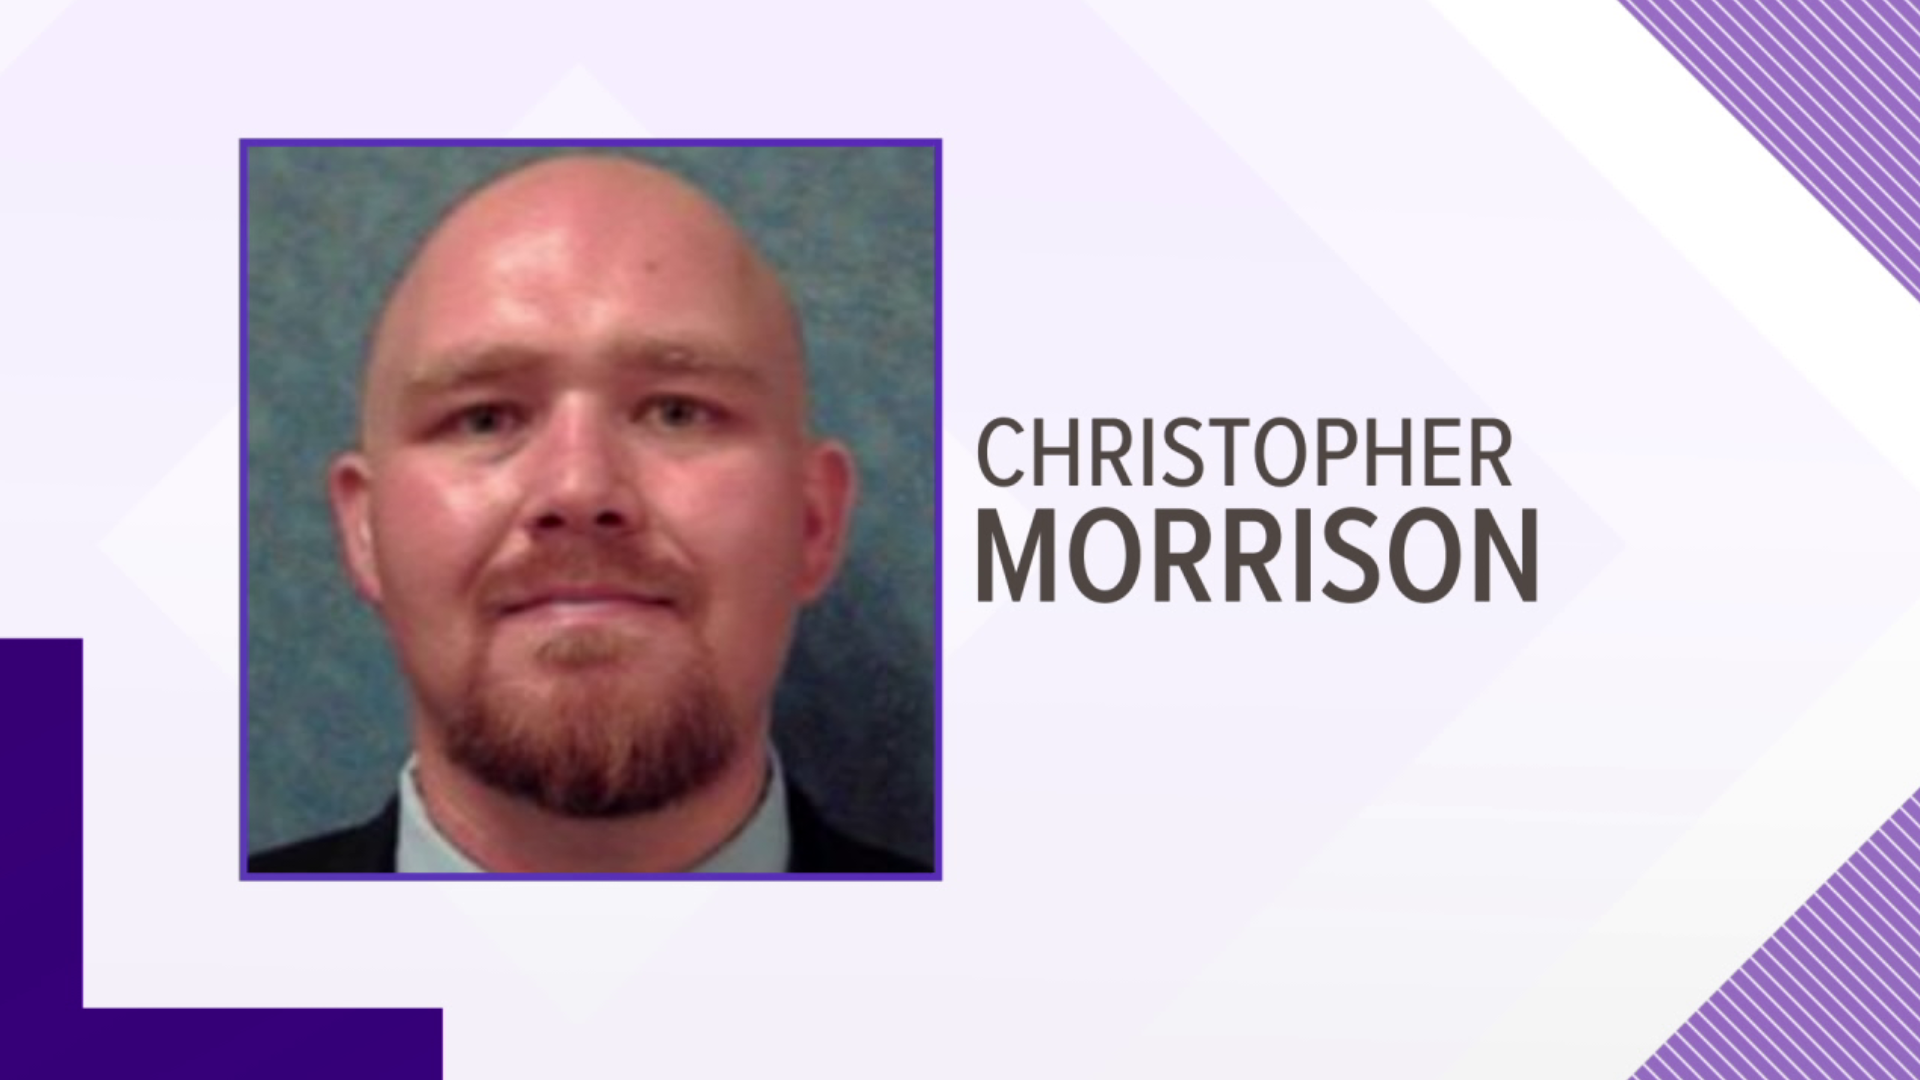 Christopher Morrison is accused of using social media to get explicit photos from four underage girls.